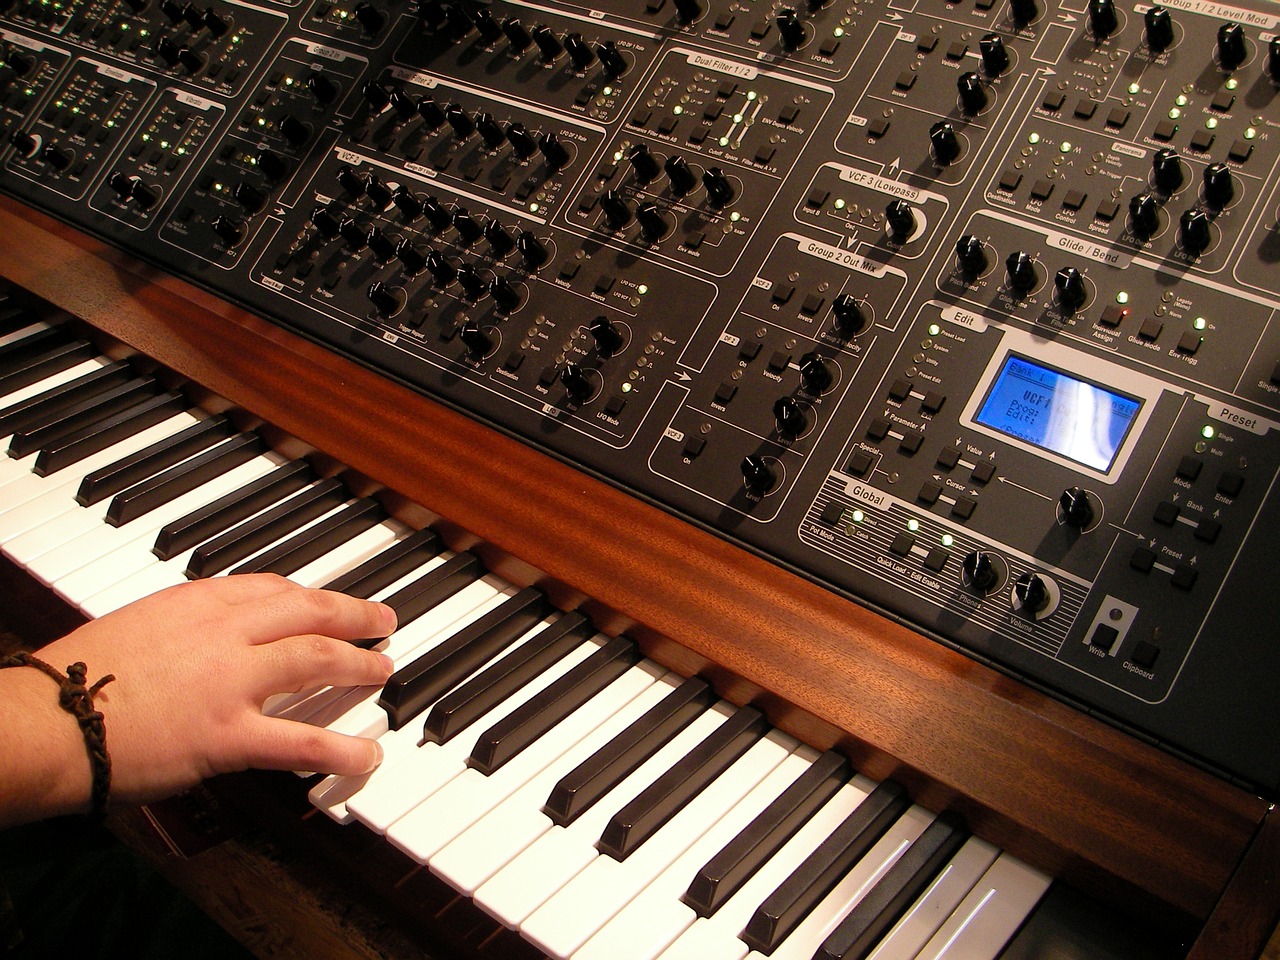 How to Make Beats with Teenage Engineering’s Pocket-Sized Synthesizers